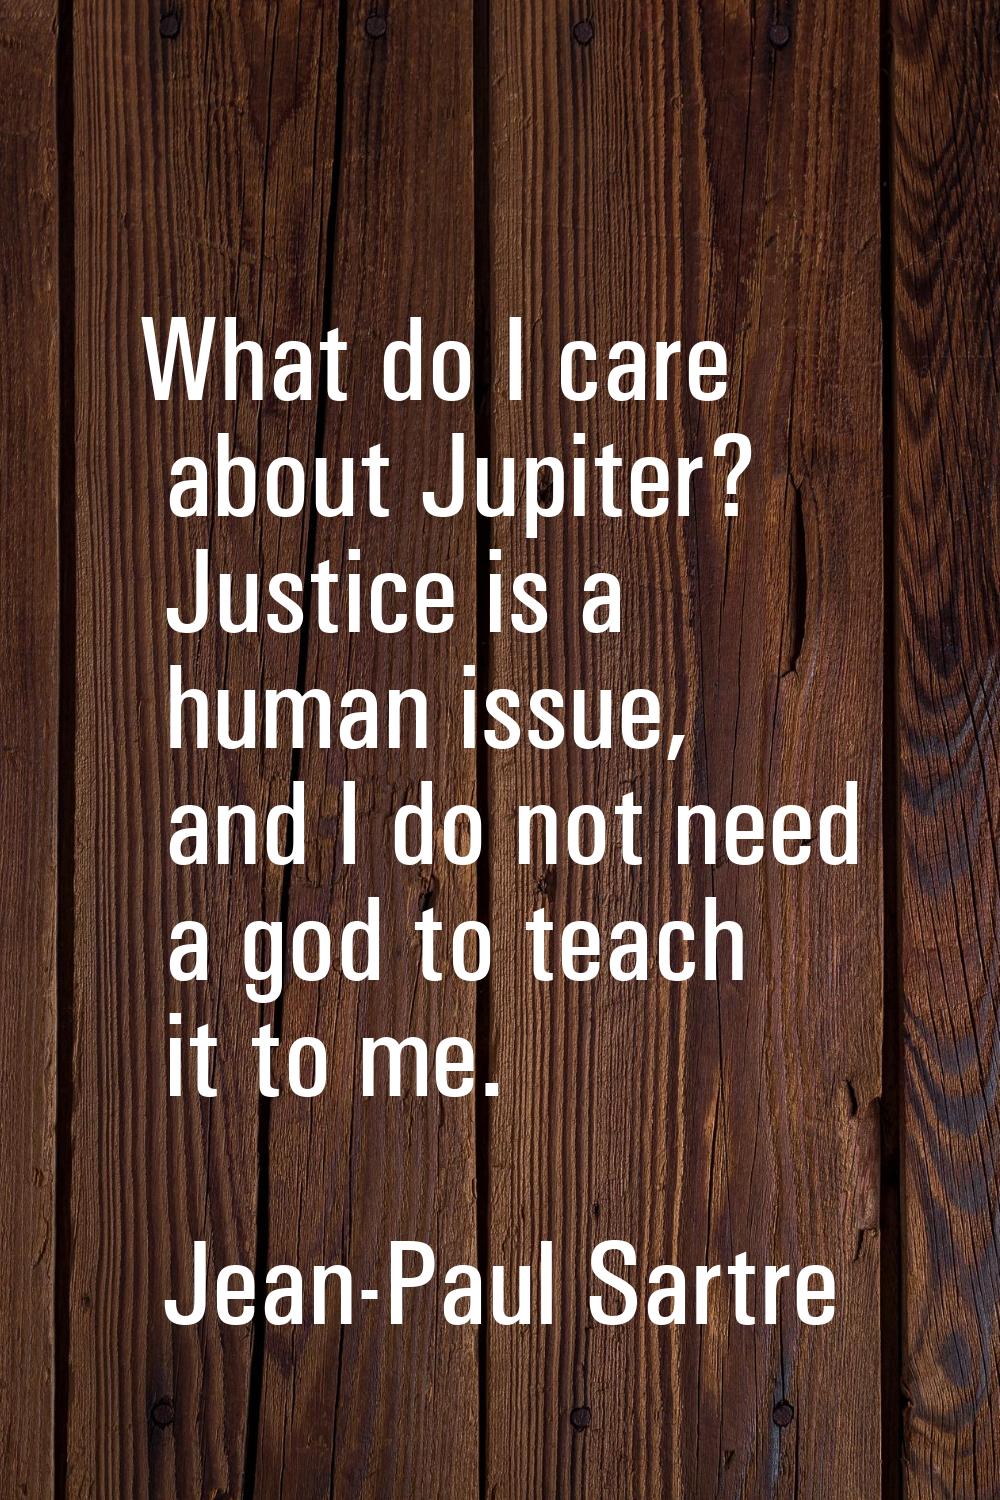 What do I care about Jupiter? Justice is a human issue, and I do not need a god to teach it to me.